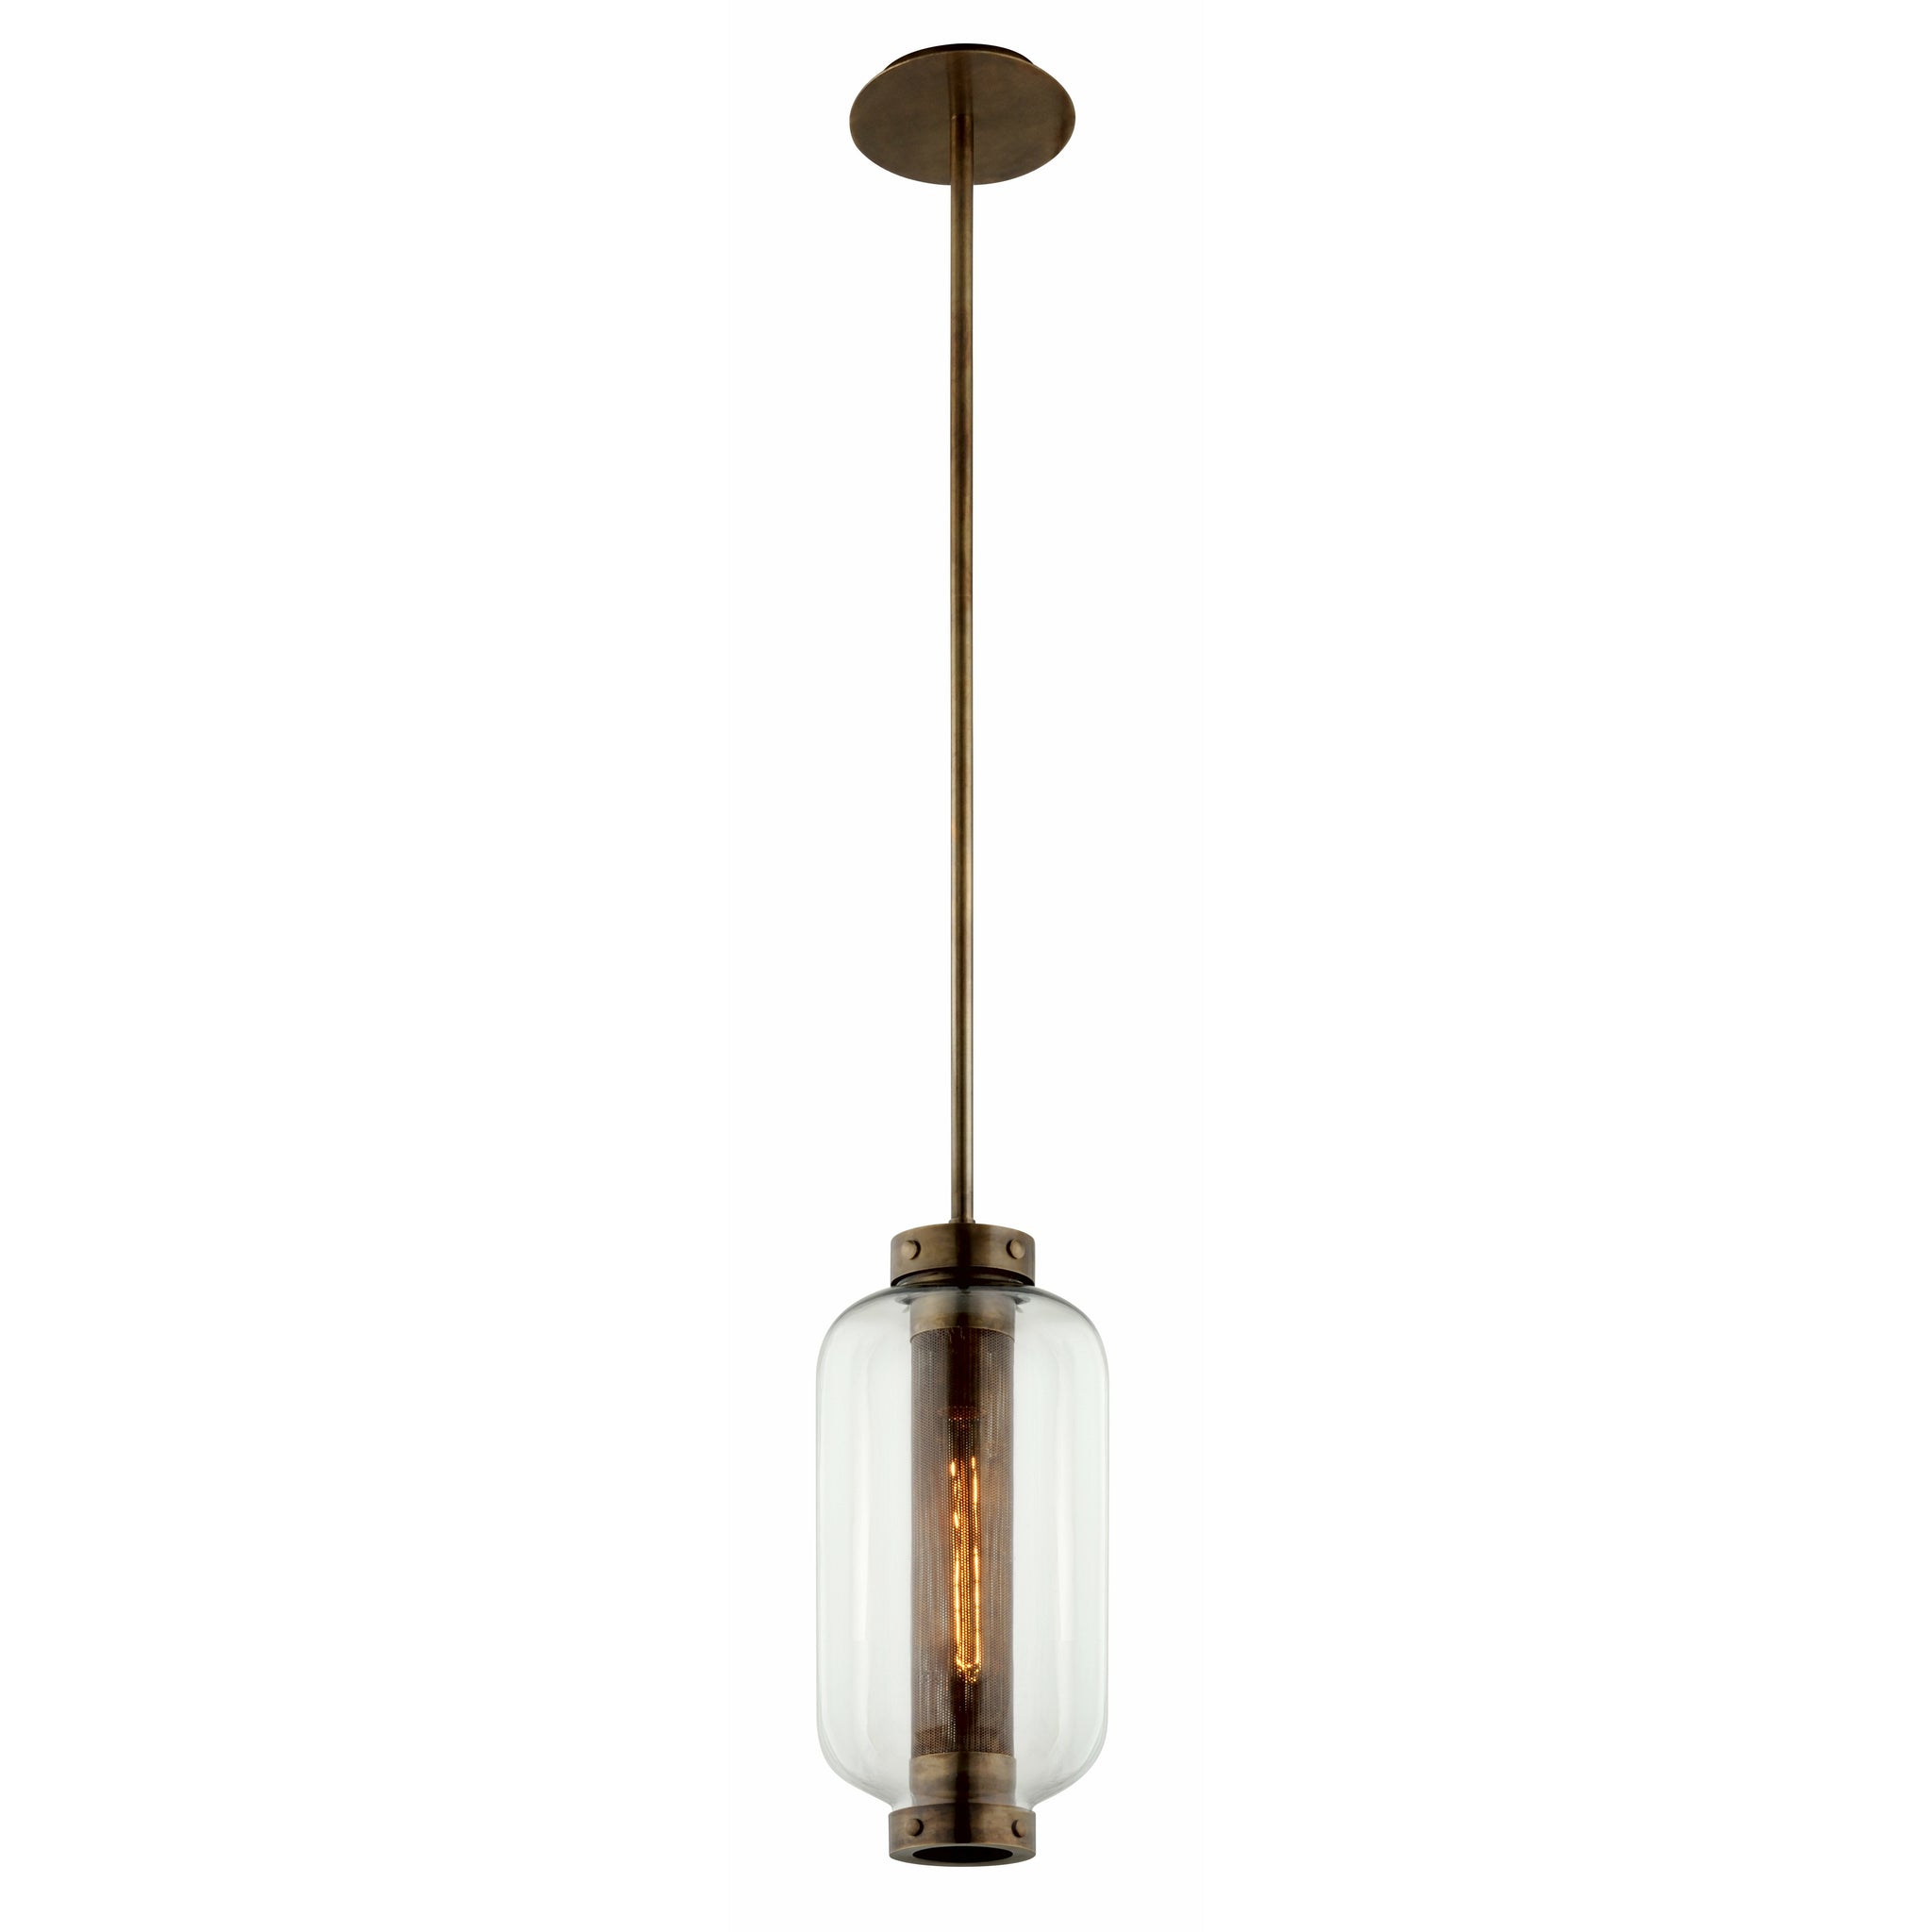 Atwater Outdoor Pendant Vintage Brass